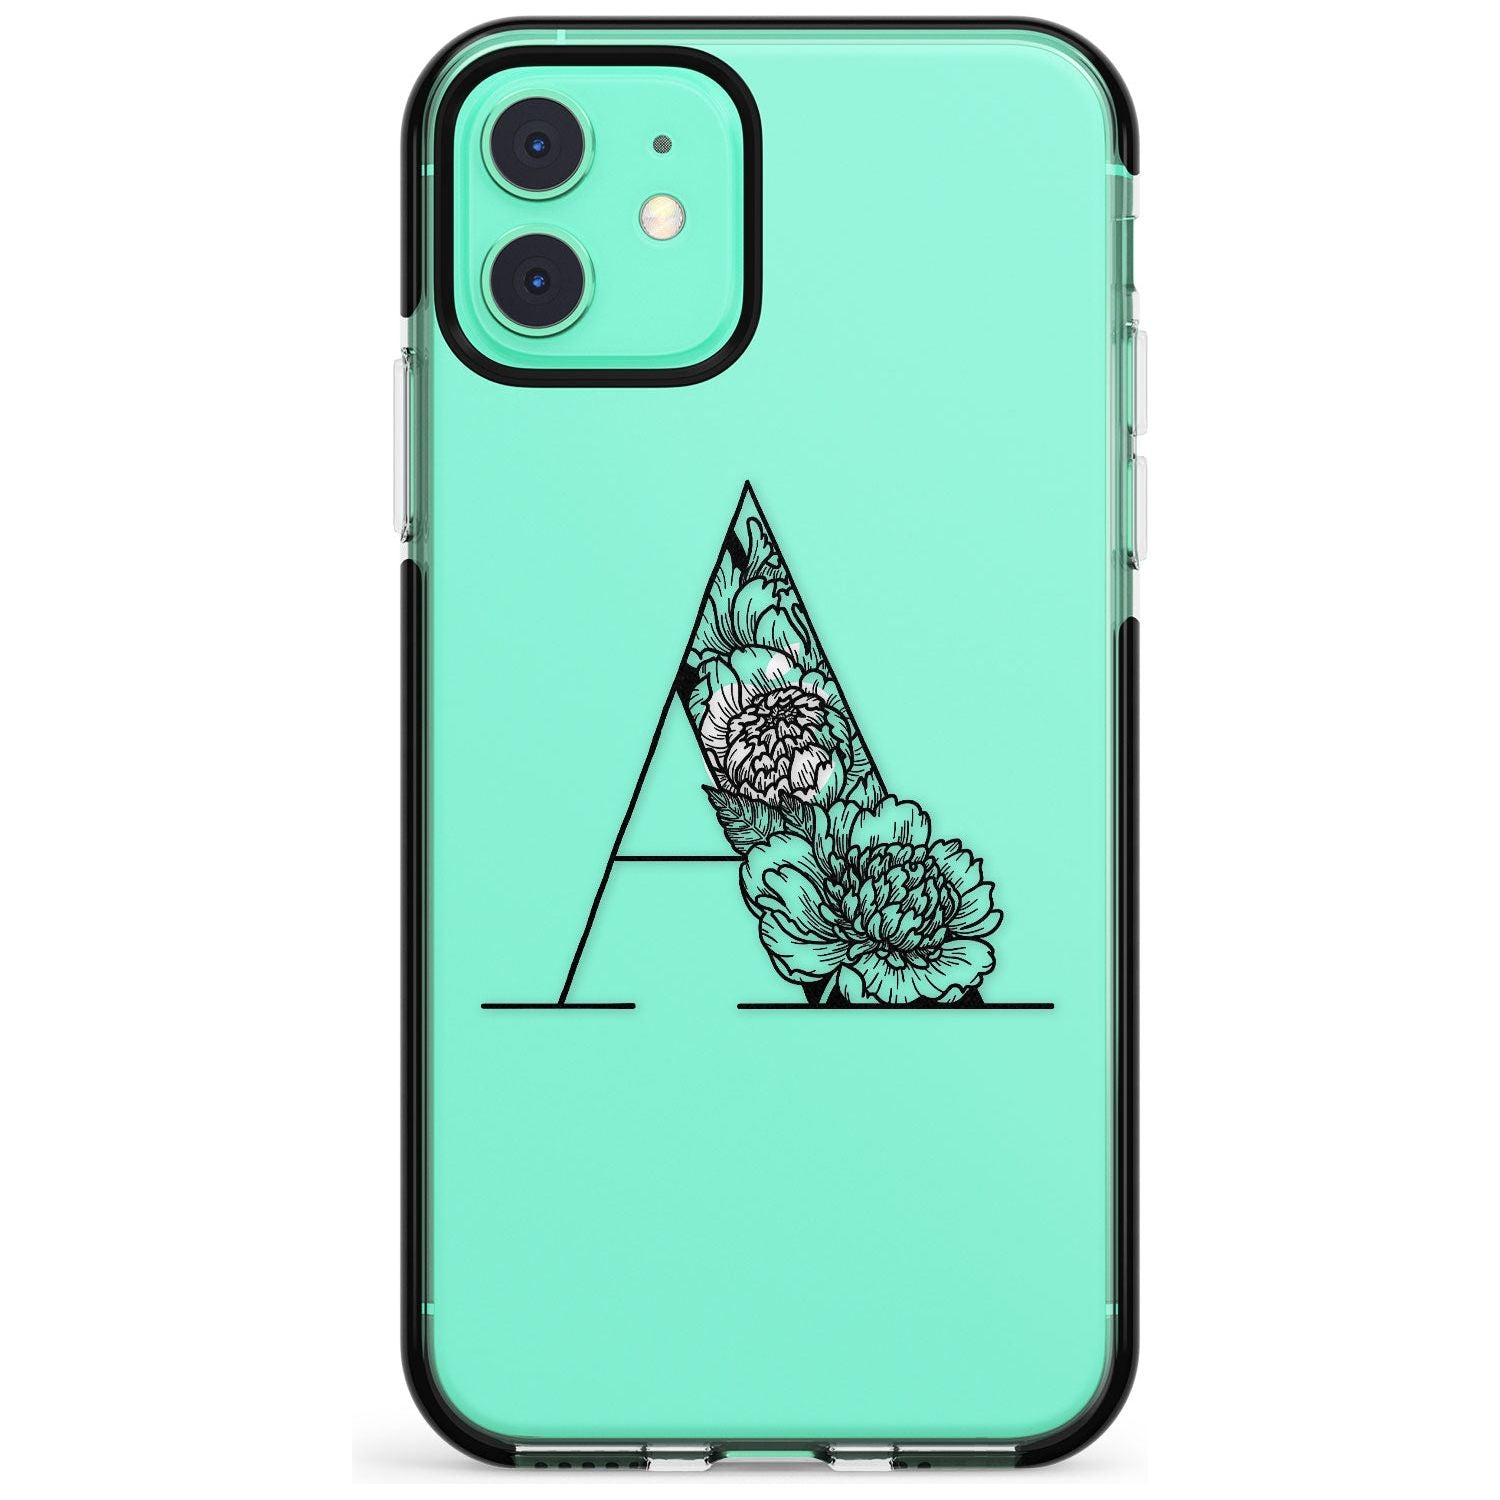 Floral Monogram Letter Pink Fade Impact Phone Case for iPhone 11 Pro Max